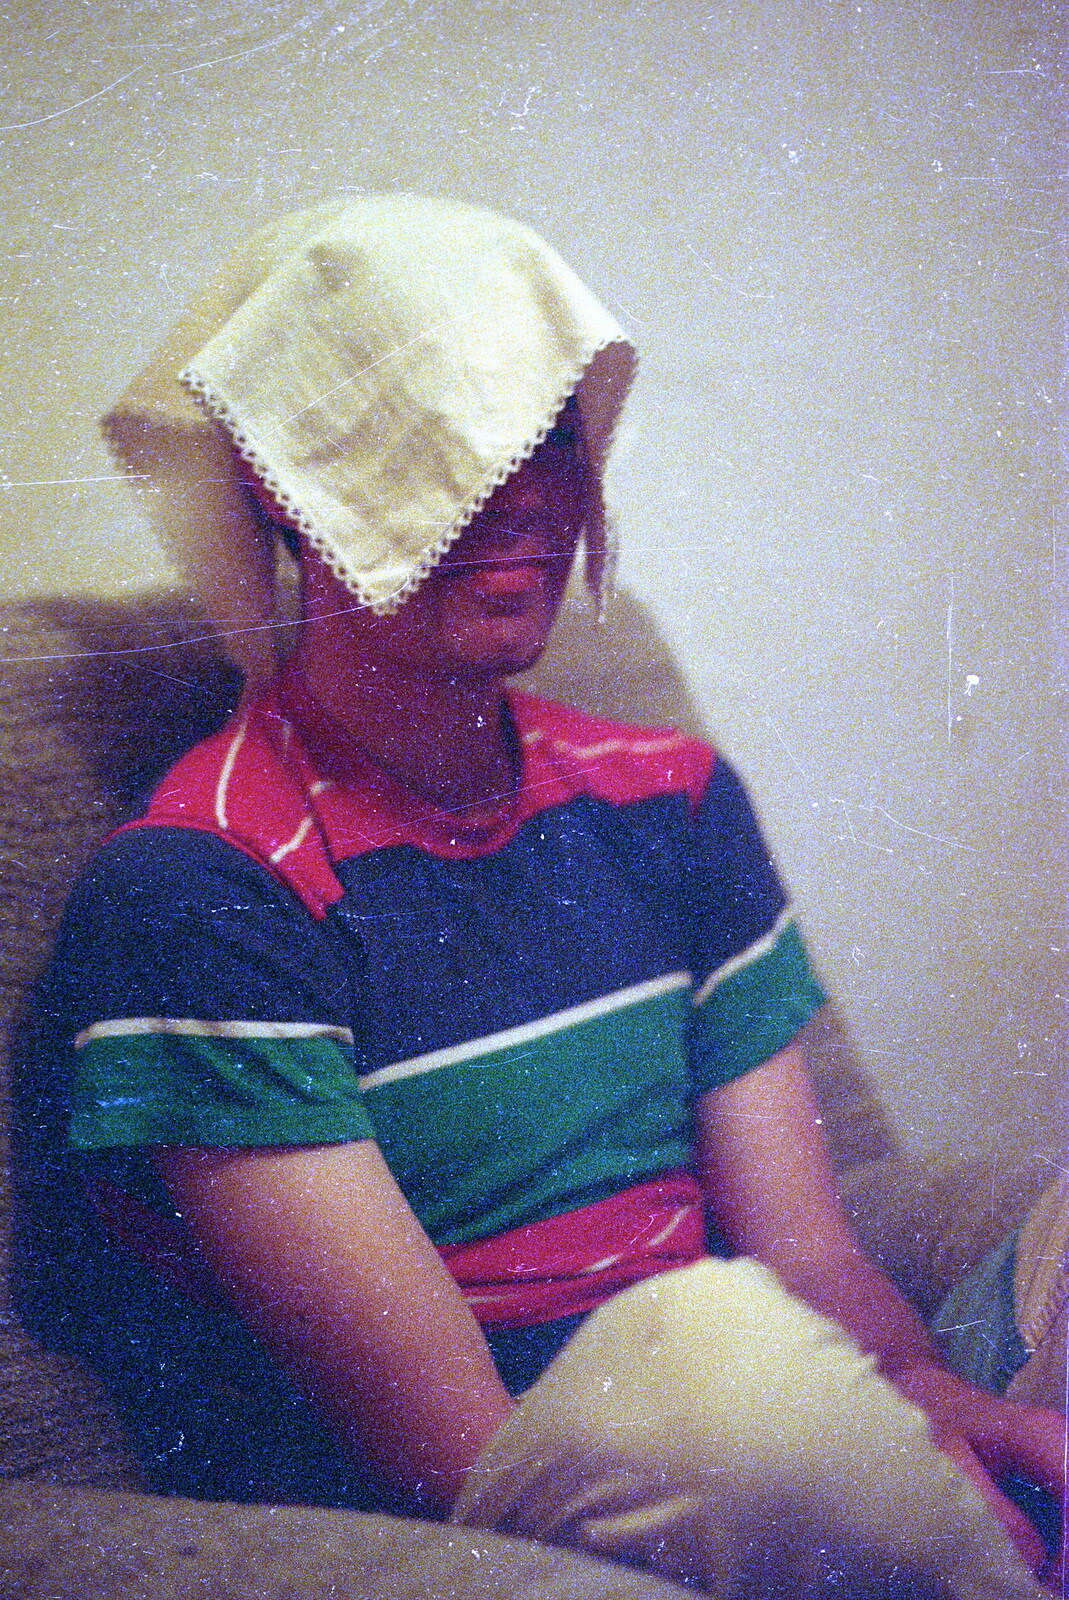 Malcolm's got a napkin on his head from Uni: First Weeks At Polytechnic, Umbrellas and a Visit From Liz, Plymouth - 26th September 1985